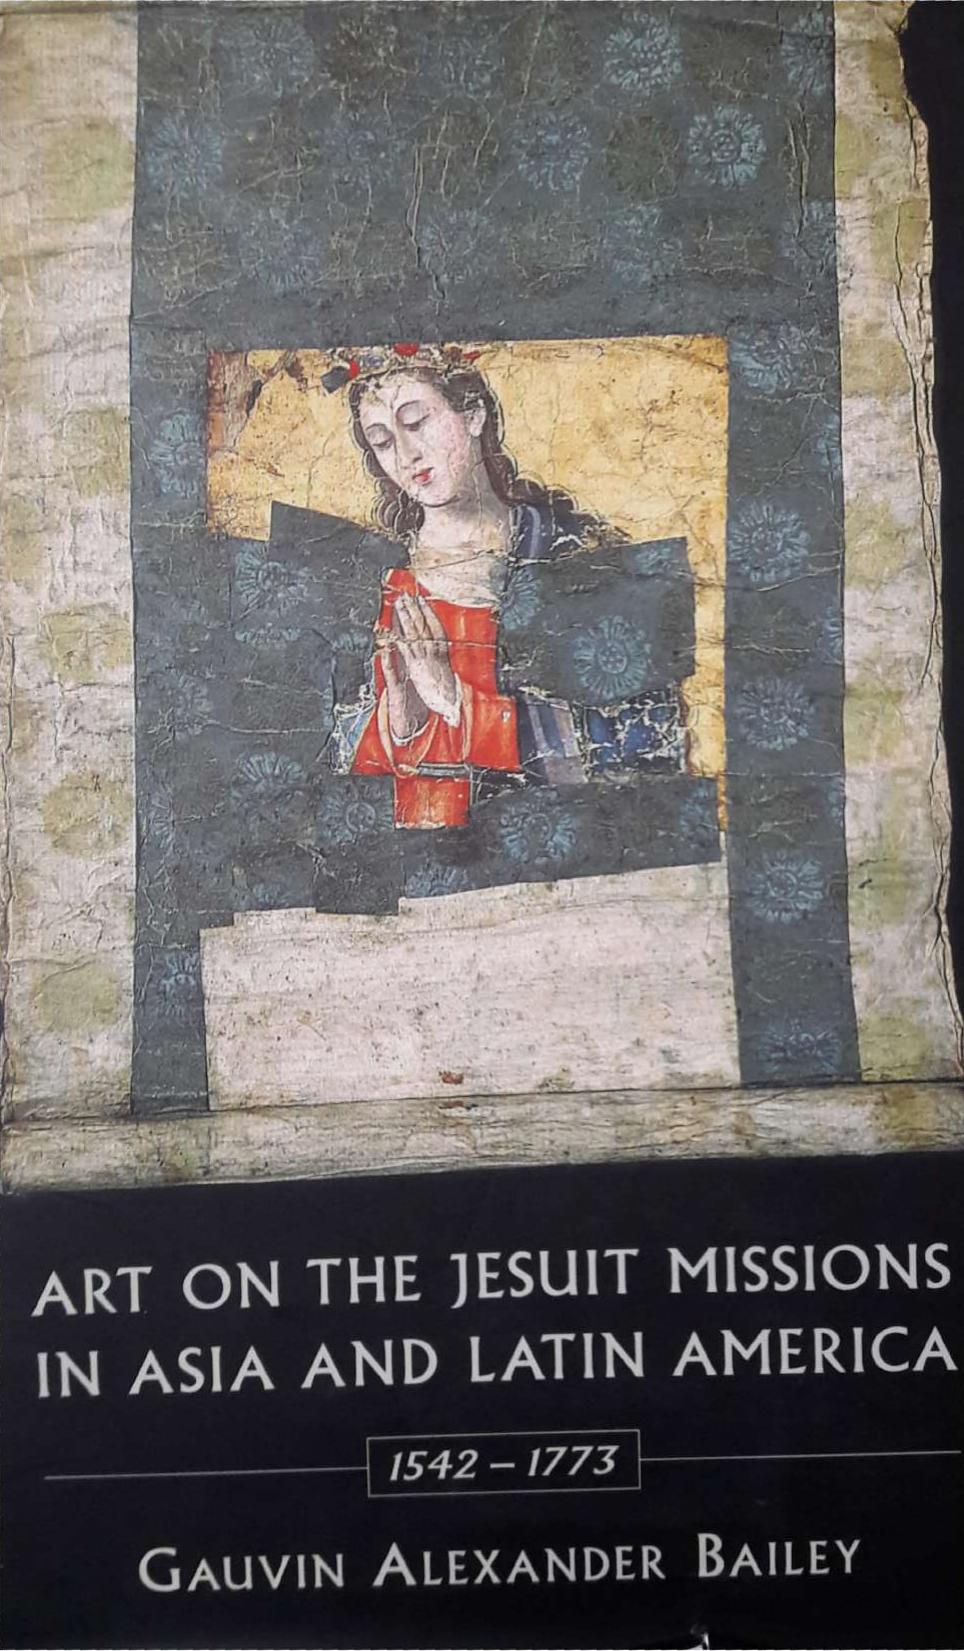 Art on Jesuit Missions in Asia and Latin America, 1542-1773 by Gauvin Alexander Bailey